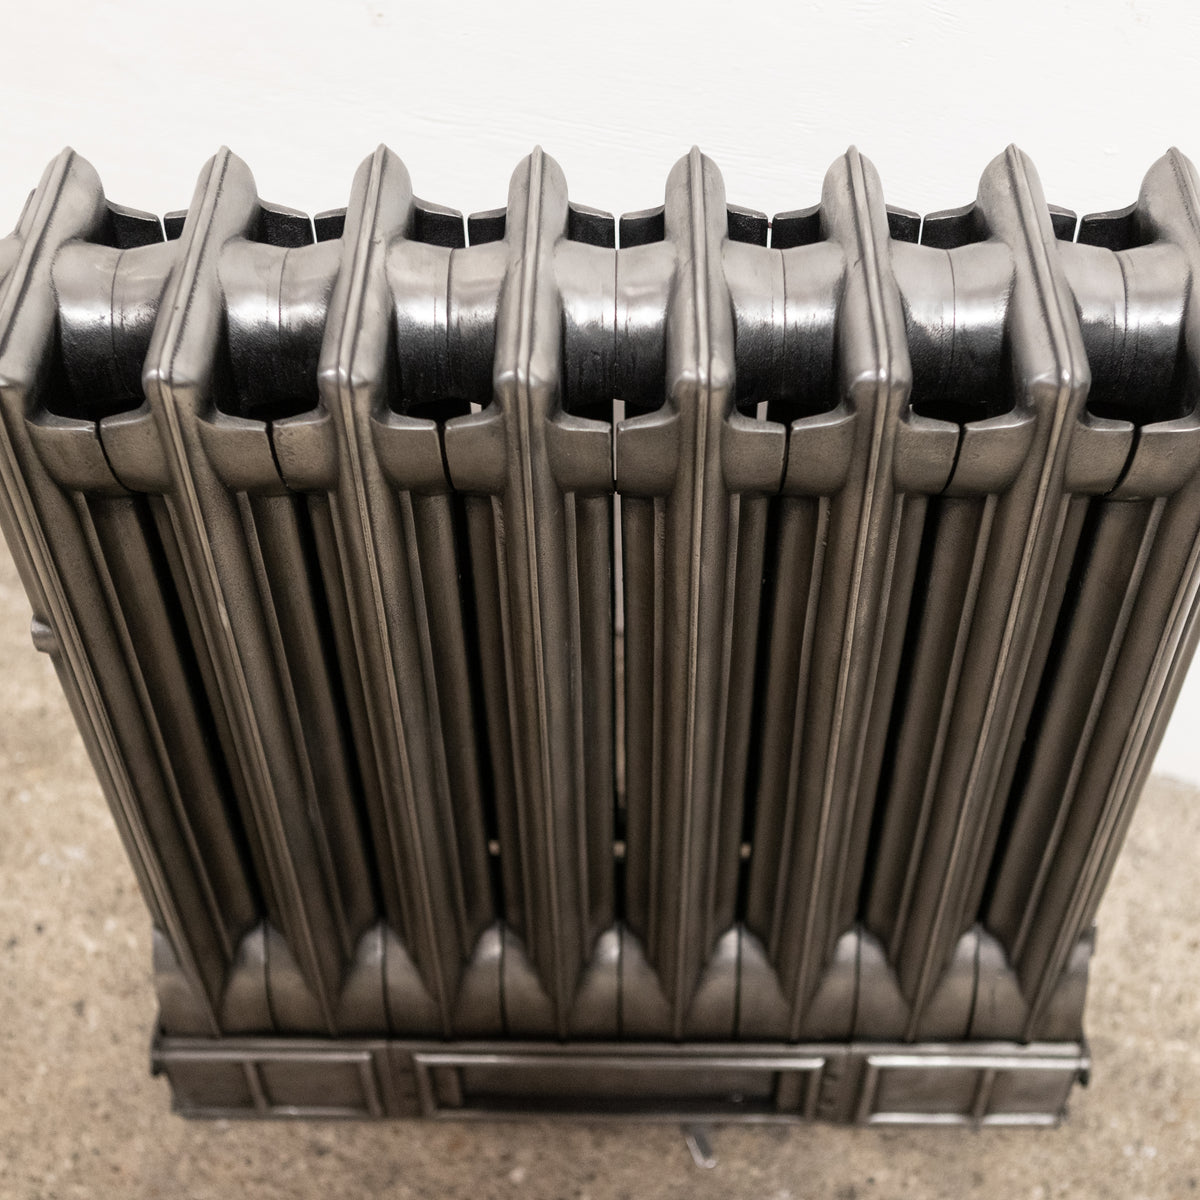 Rare Art Deco Cast Iron Radiator Reclaimed from Mercers Hall | The Architectural Forum